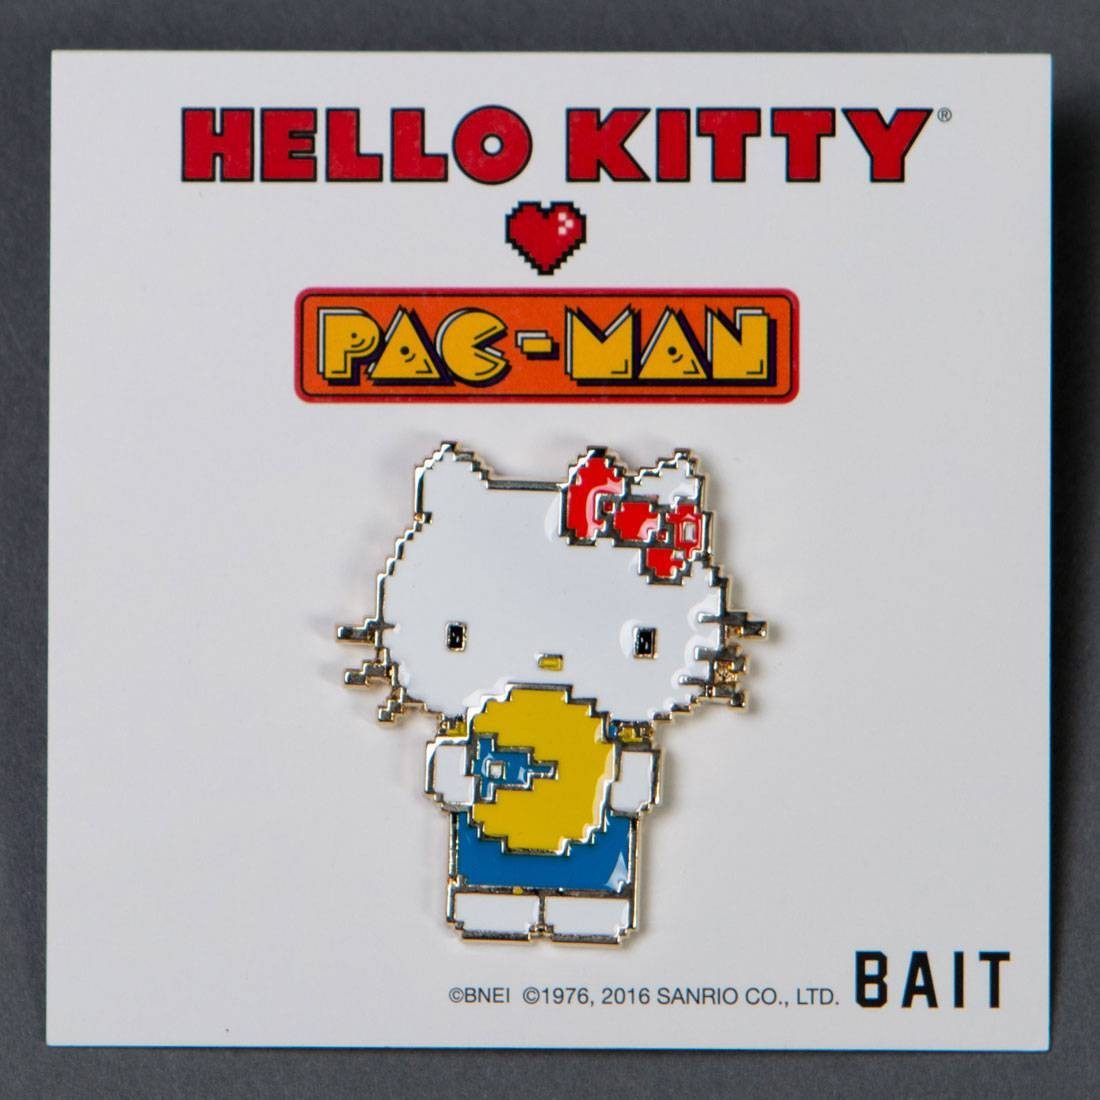 Network-presidentsShops x Friday The 13th x Pac-Man Hello Kitty Pin white